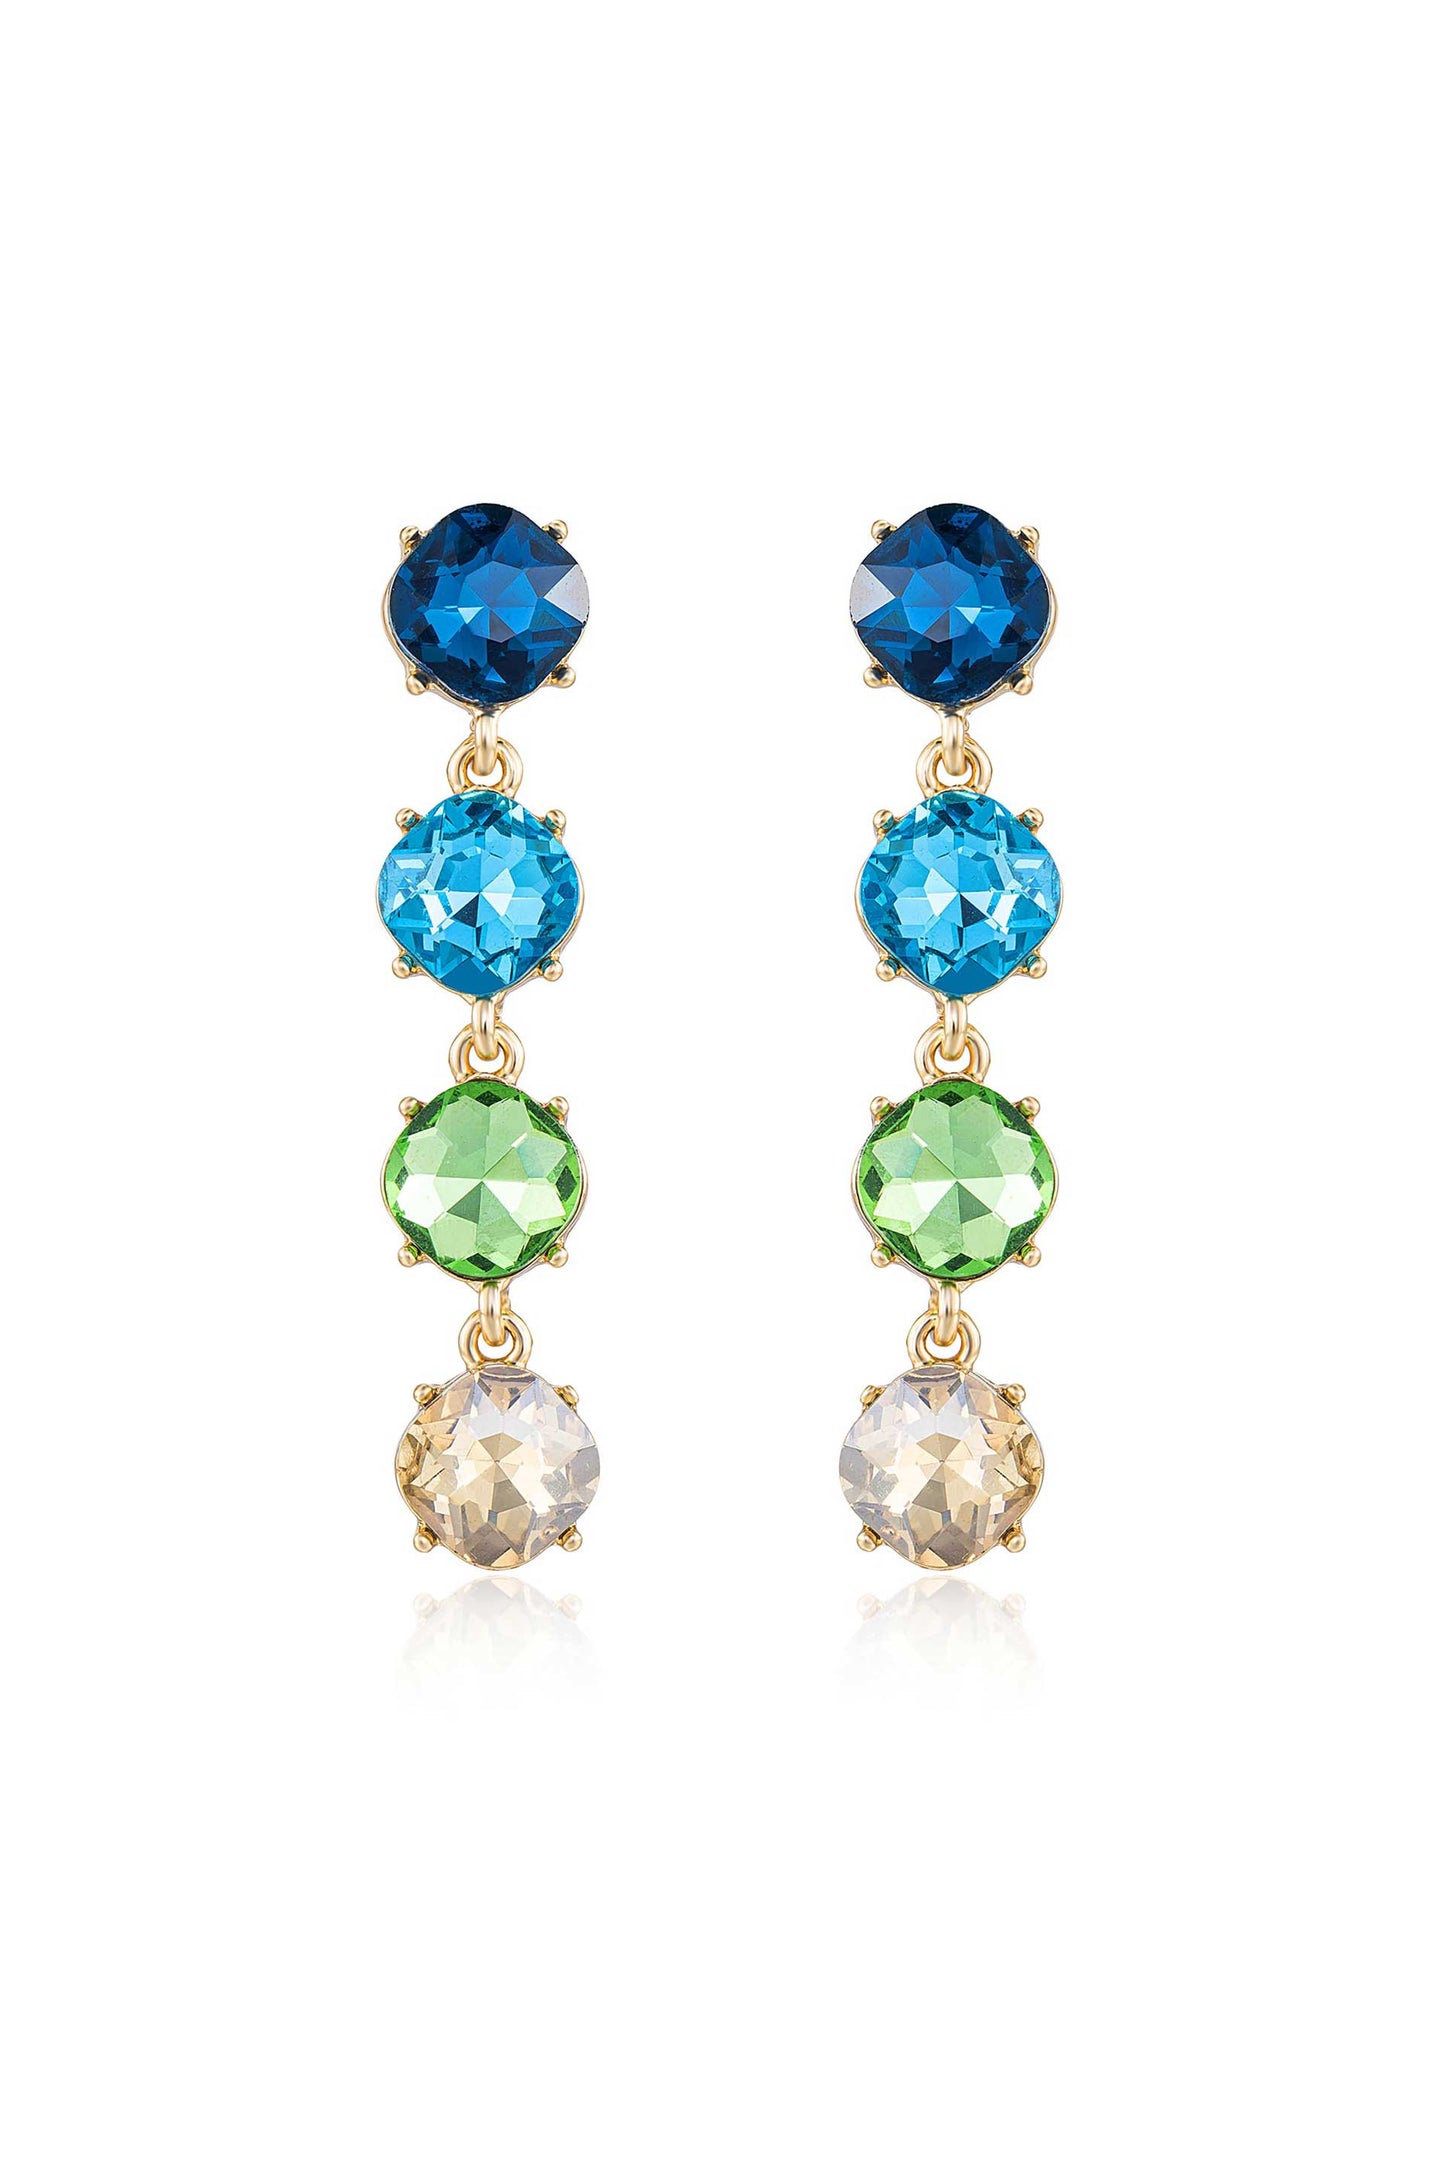 Four the Money 18k Gold Plated Earrings in blue